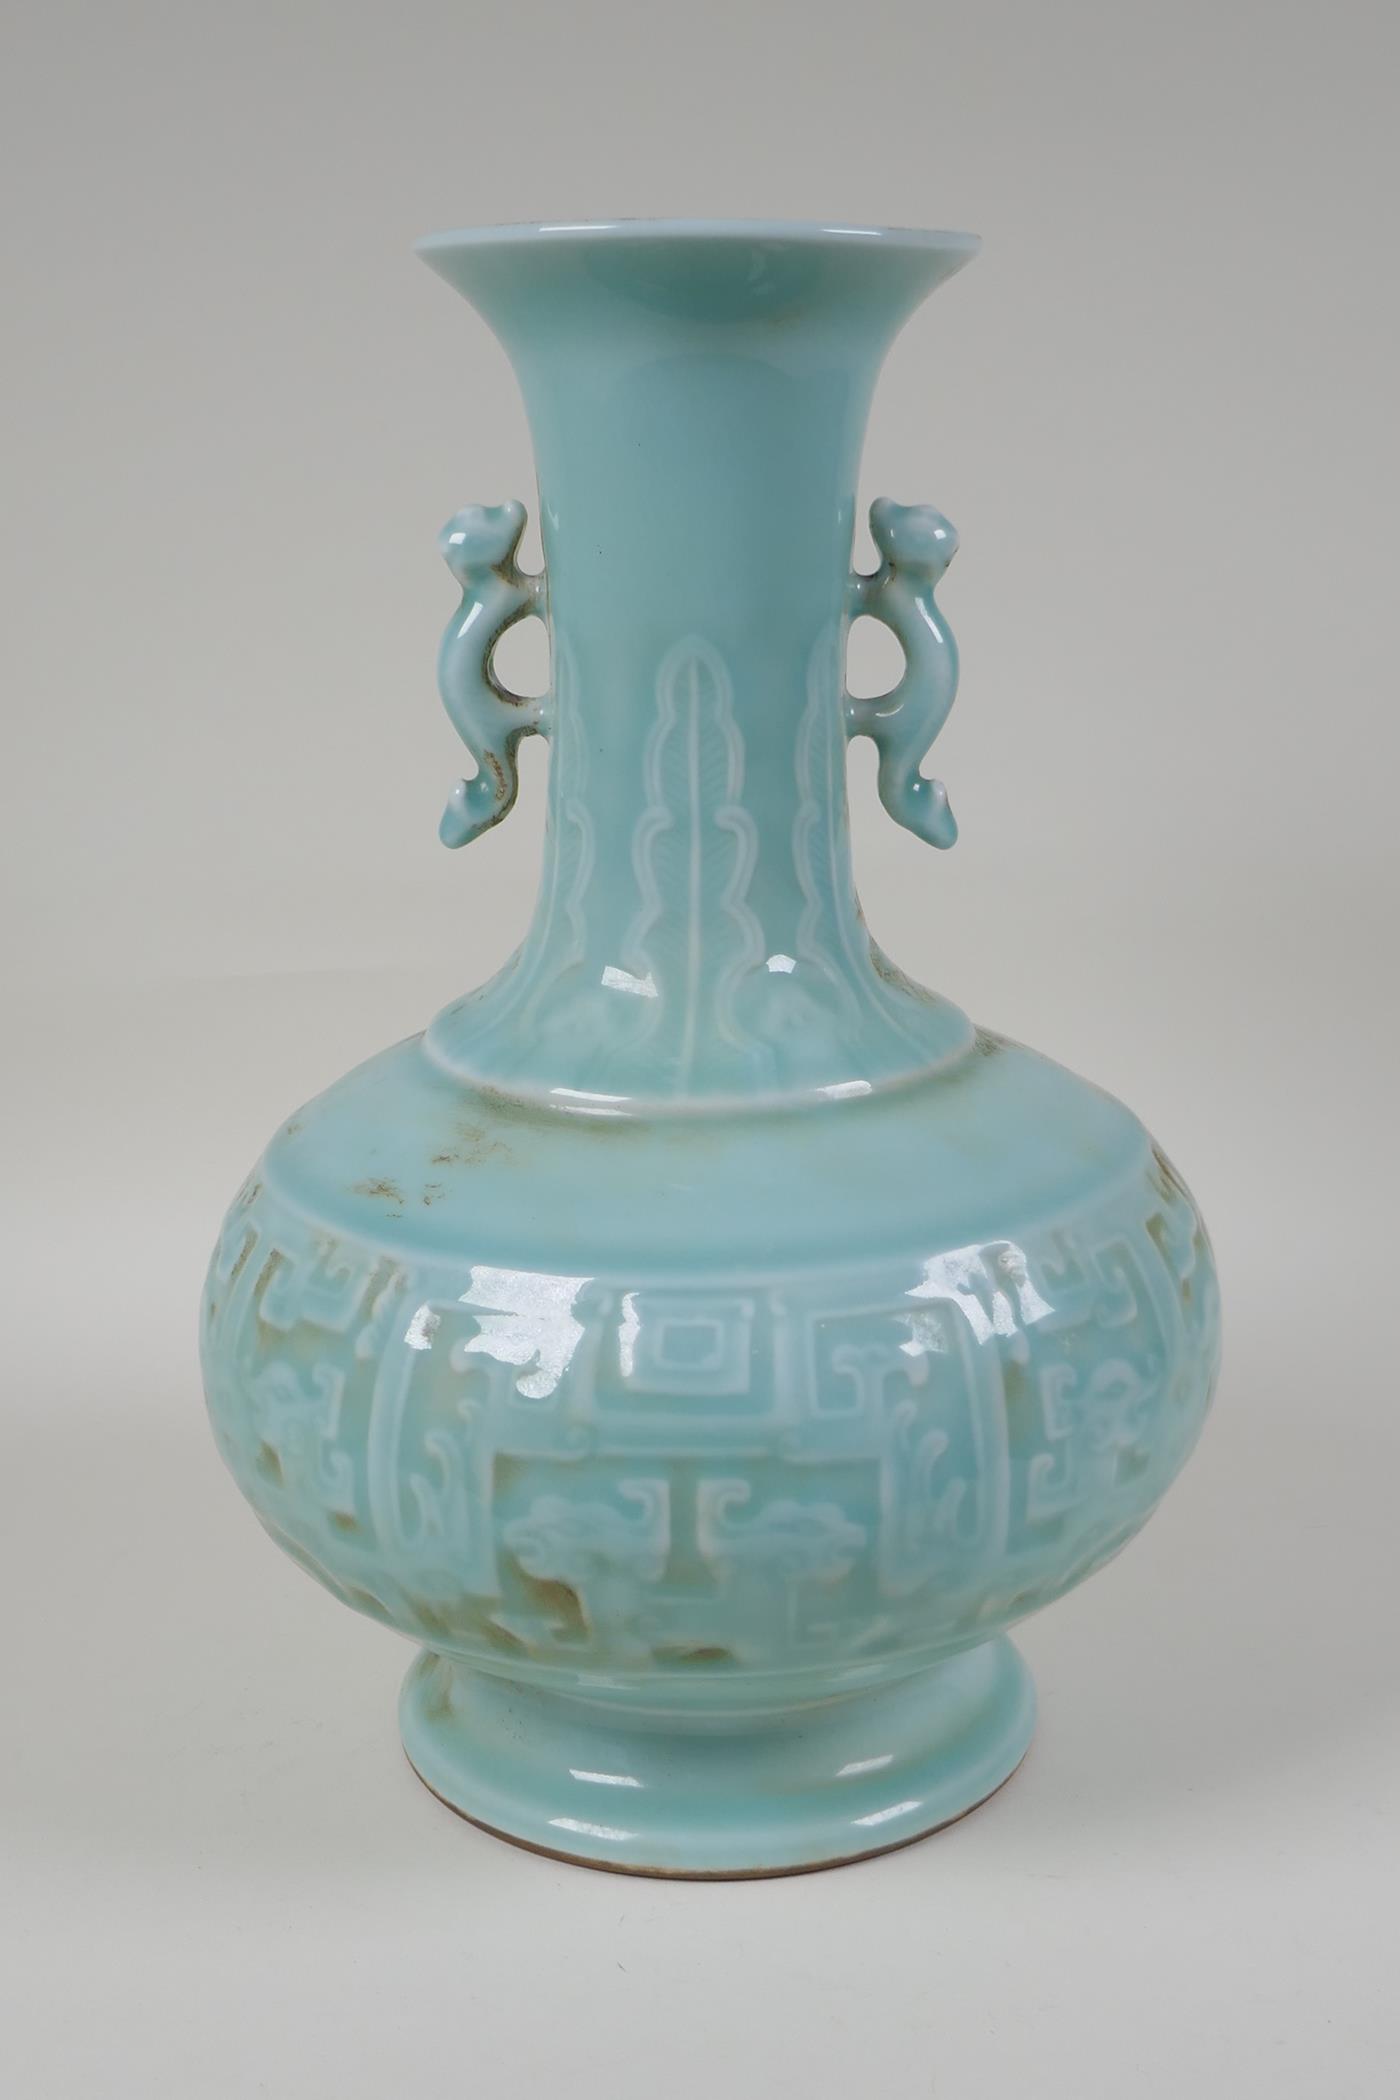 A celadon glazed porcelain vase with two kylin shaped handles and archaic style underglaze dragon